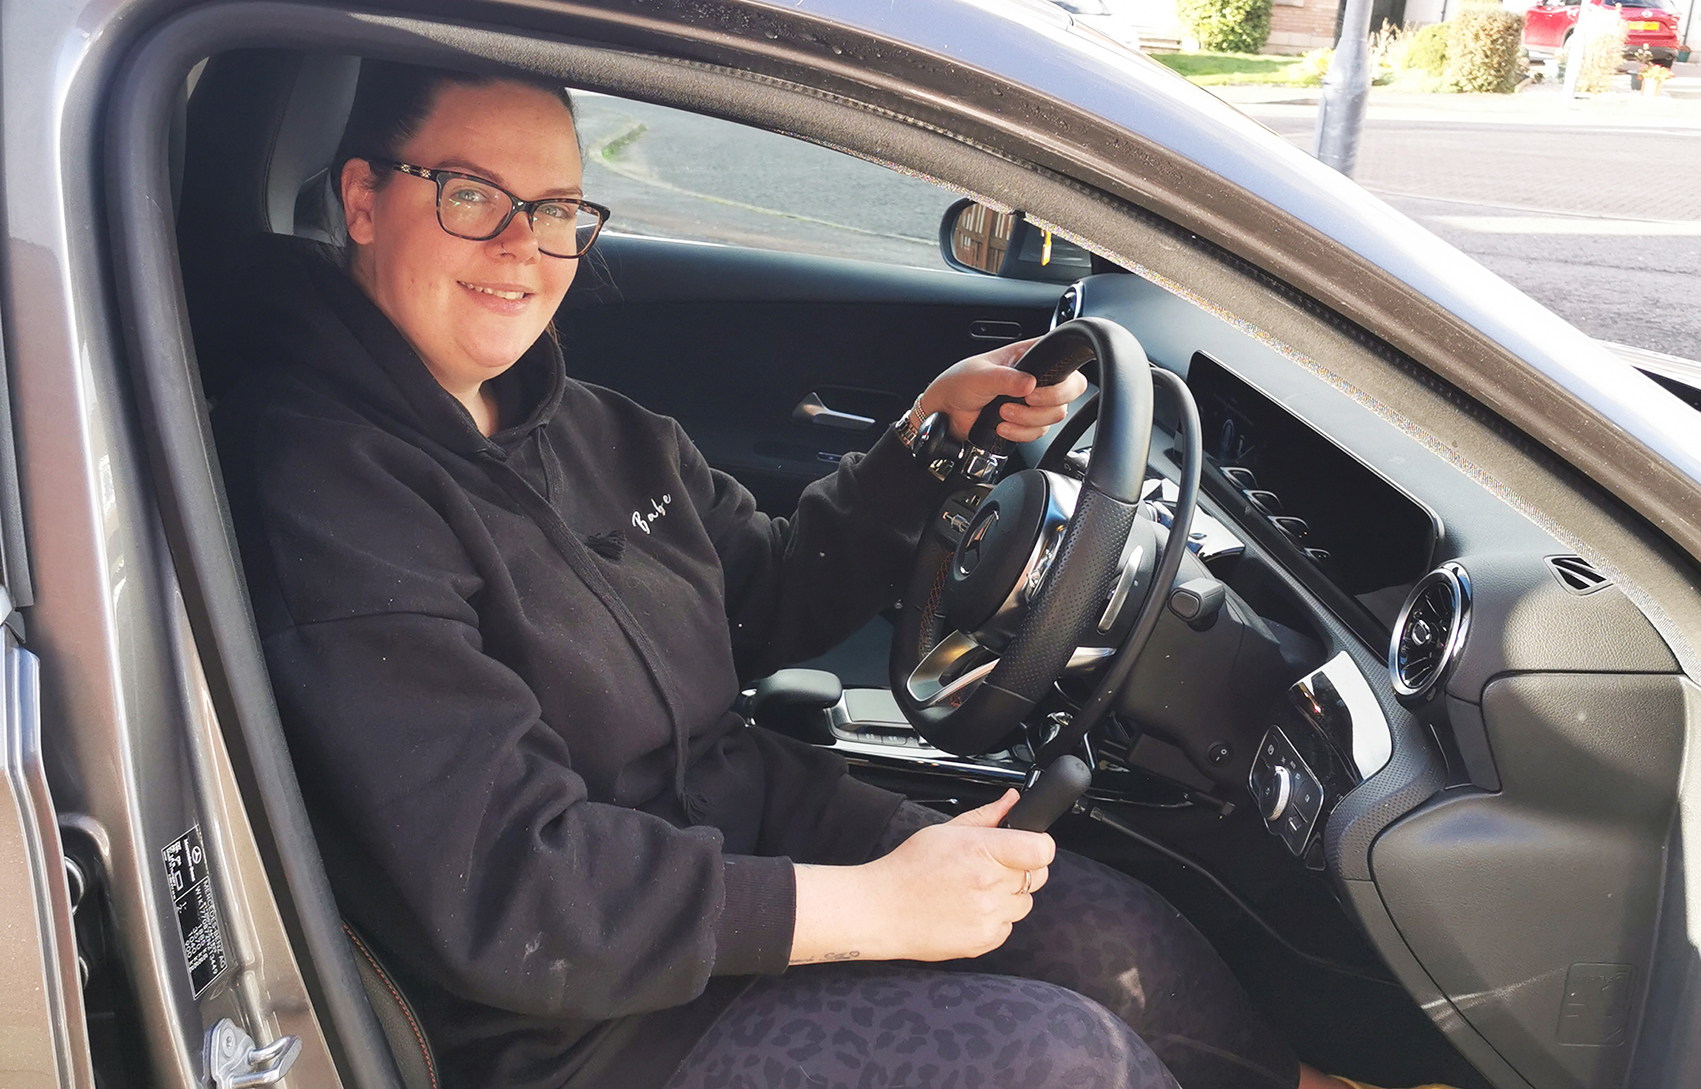 Ayrshire’s Sarah with MS ‘back being Mum’ thanks  to DriveAbility Scotland